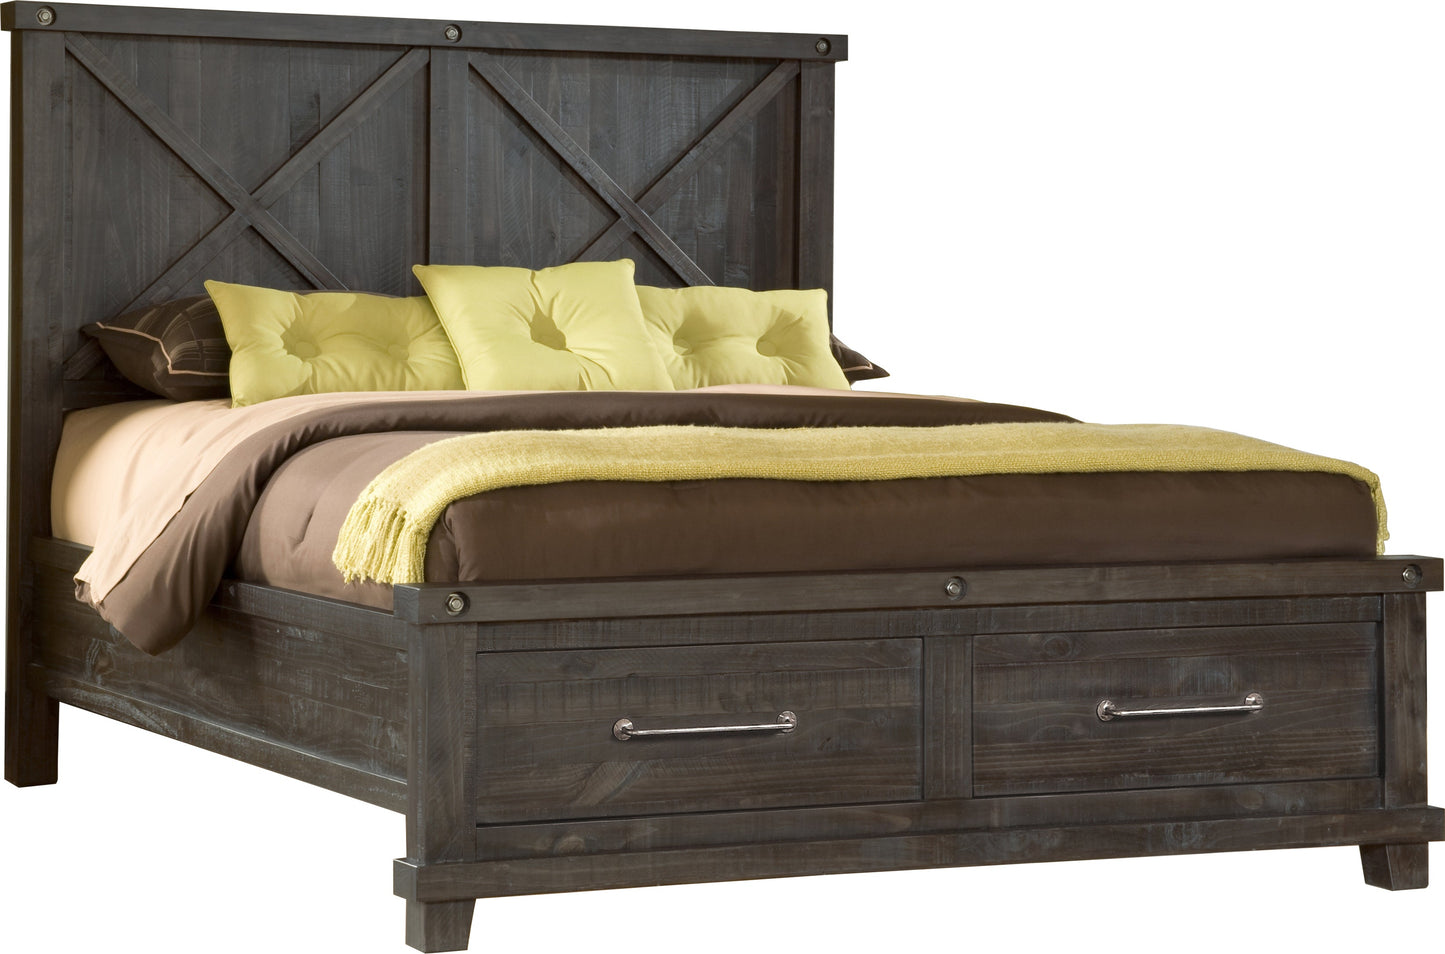 Modus Yosemite E King Storage Bed in Cafe